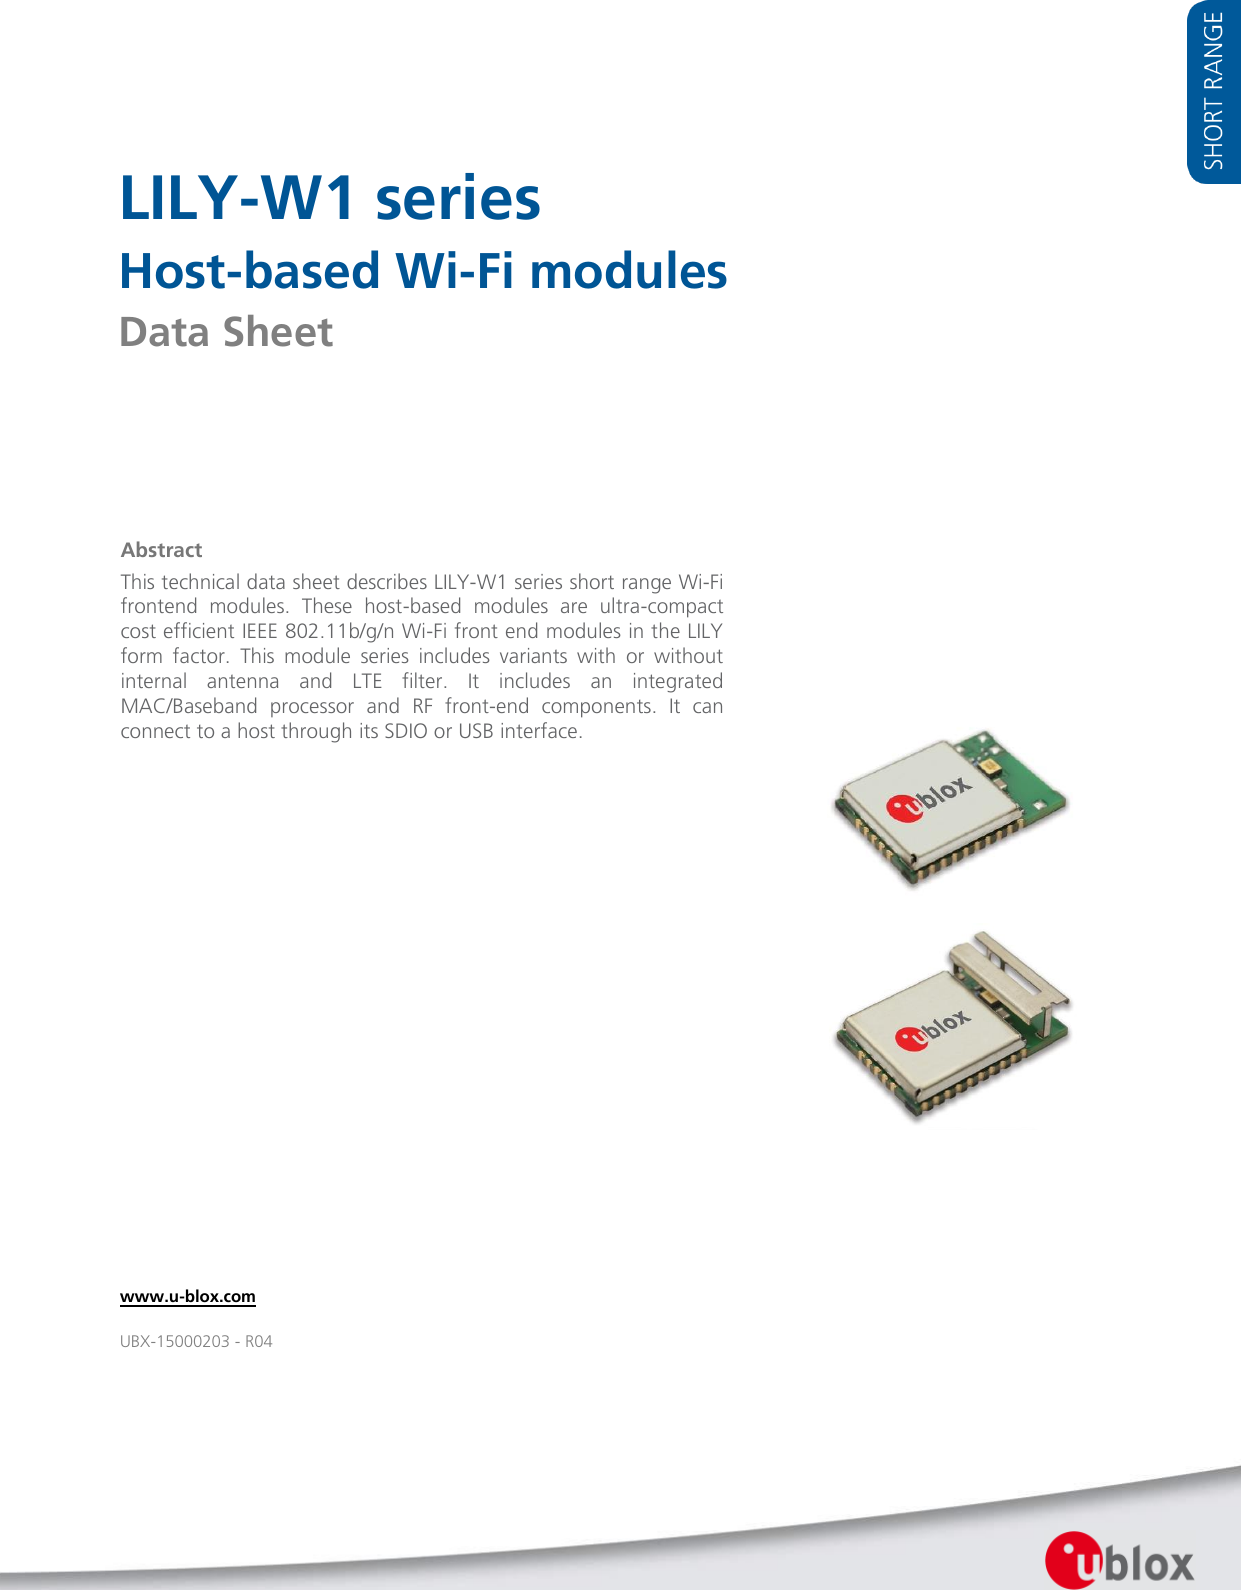    LILY-W1 series Host-based Wi-Fi modules Data Sheet                       Abstract This technical data sheet describes LILY-W1 series short range Wi-Fi frontend  modules.  These  host-based  modules  are  ultra-compact cost efficient IEEE 802.11b/g/n Wi-Fi front end modules in the LILY form  factor.  This  module  series  includes  variants  with  or  without internal  antenna  and  LTE  filter.  It  includes  an  integrated MAC/Baseband  processor  and  RF  front-end  components.  It  can connect to a host through its SDIO or USB interface. www.u-blox.com UBX-15000203 - R04 